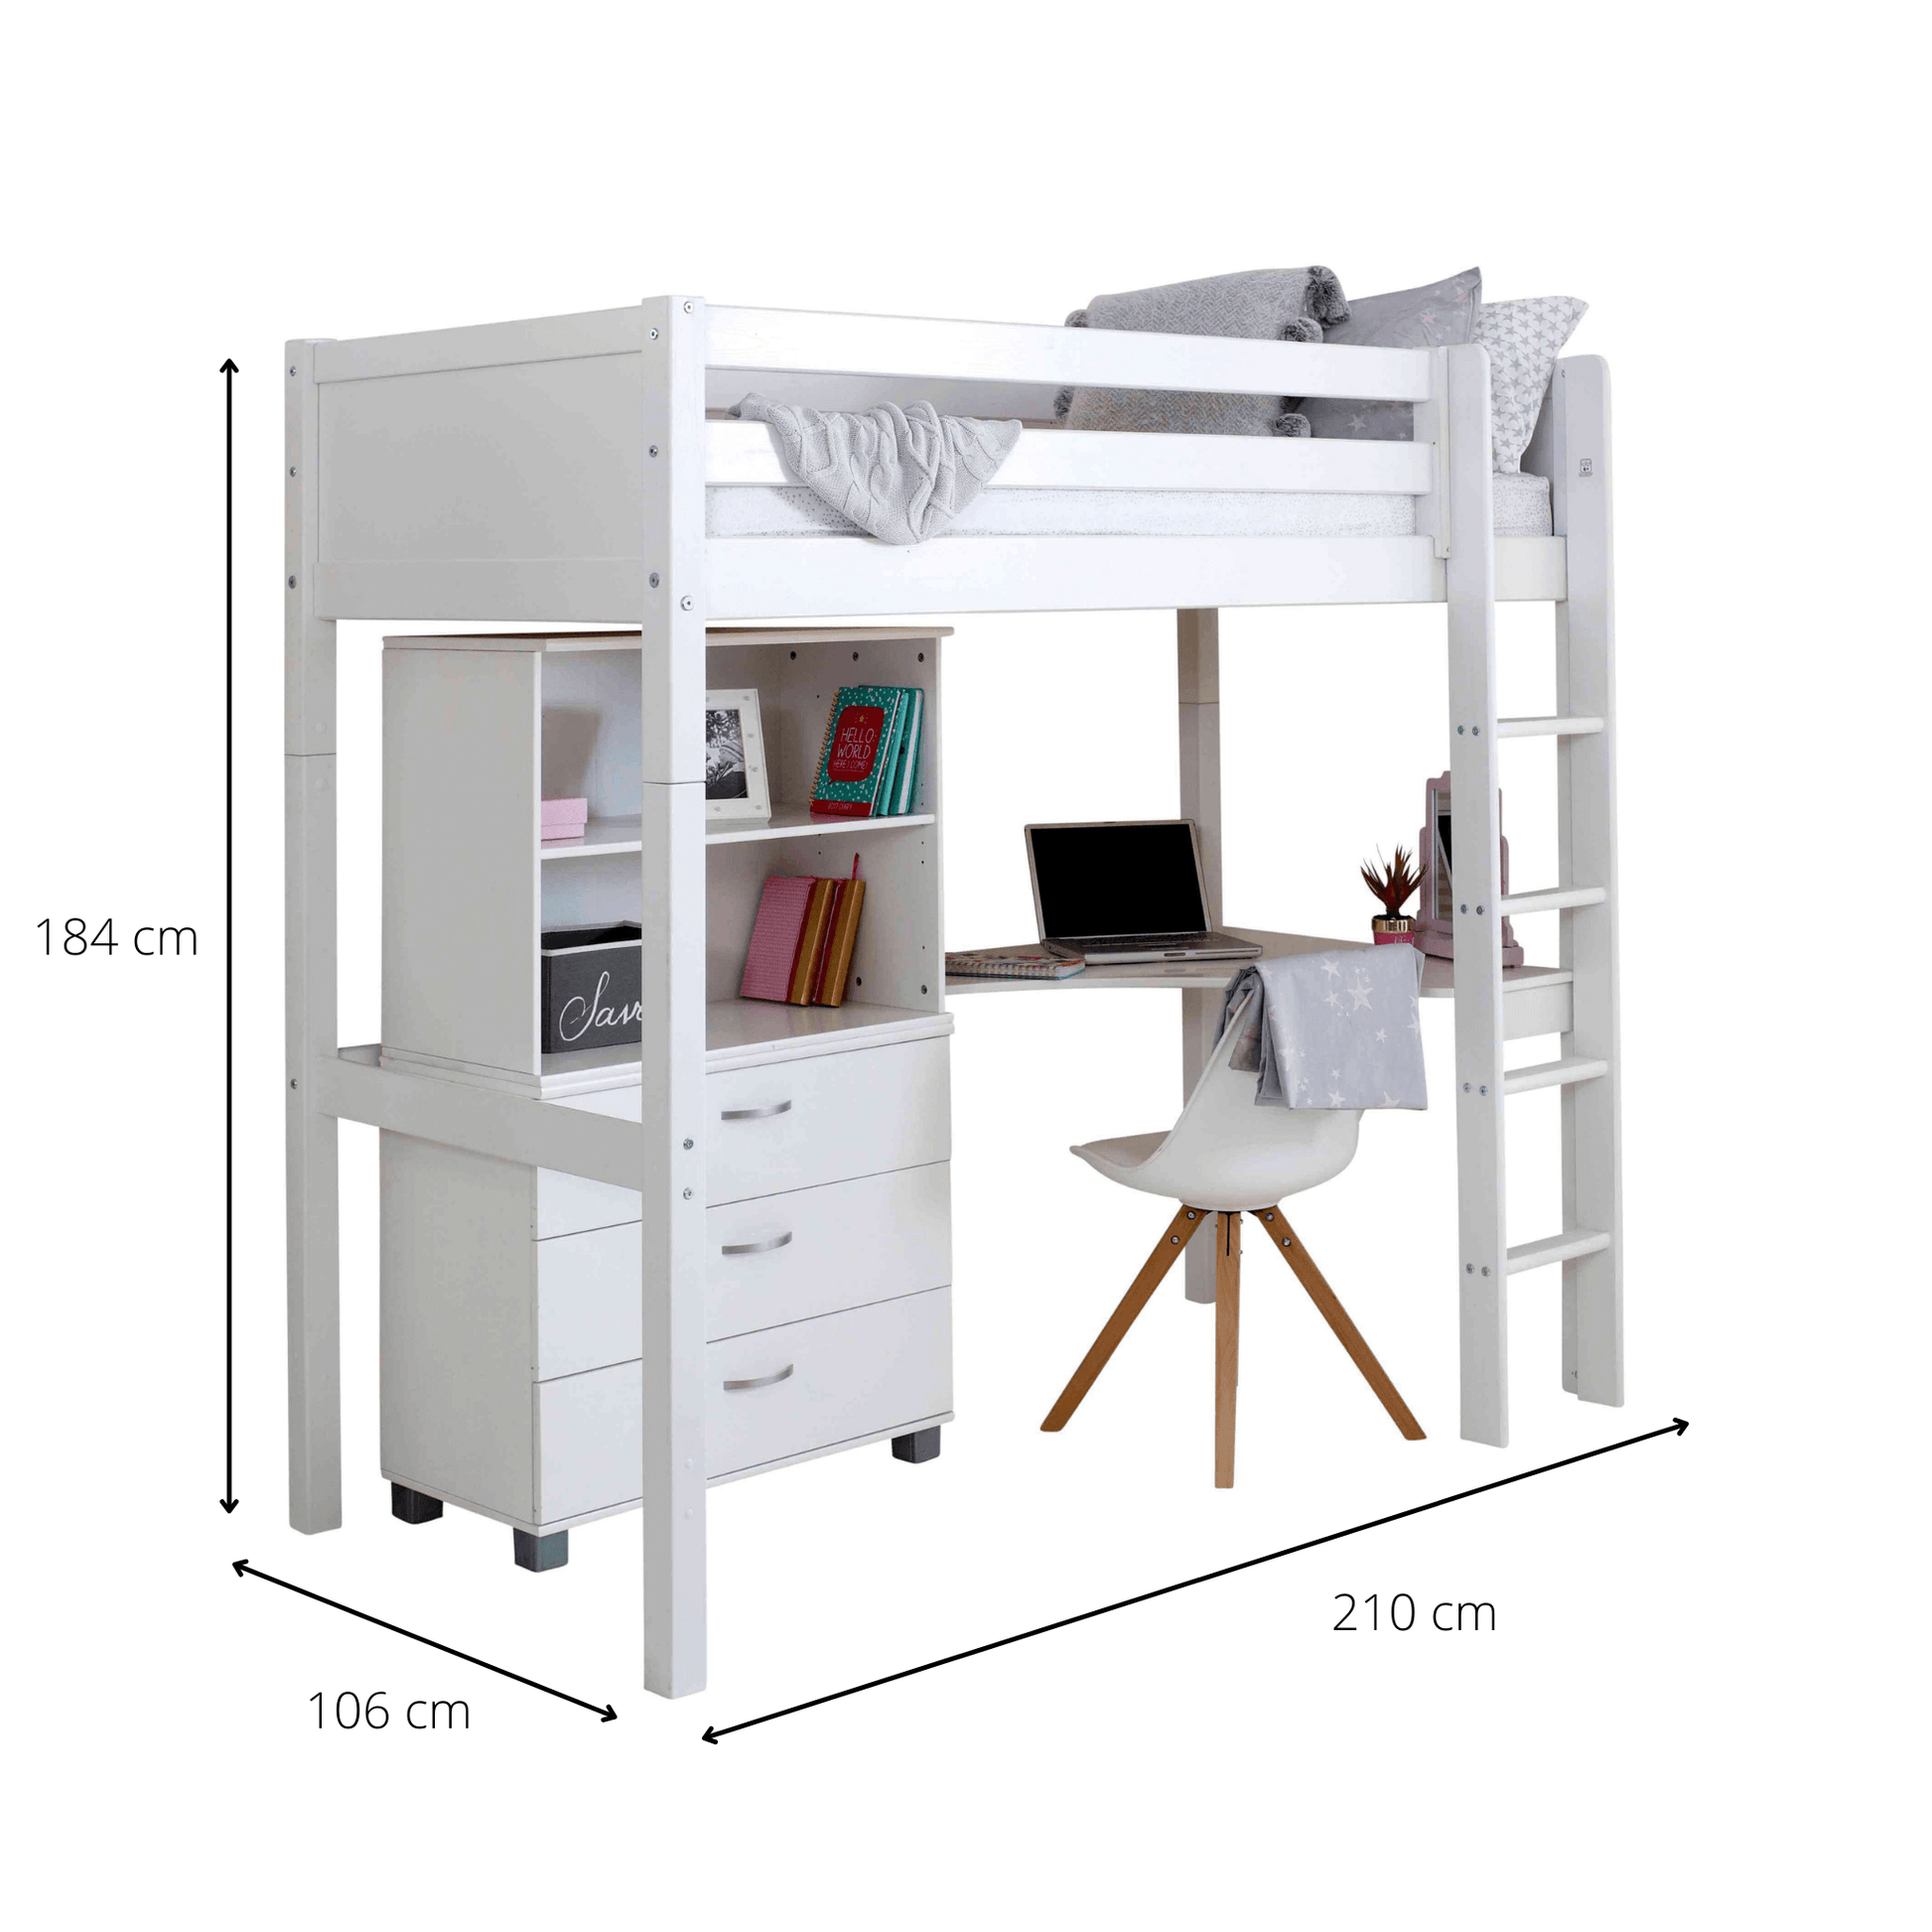 Jens Nordic High Sleeper Bed with Desk & Storage Dimensions